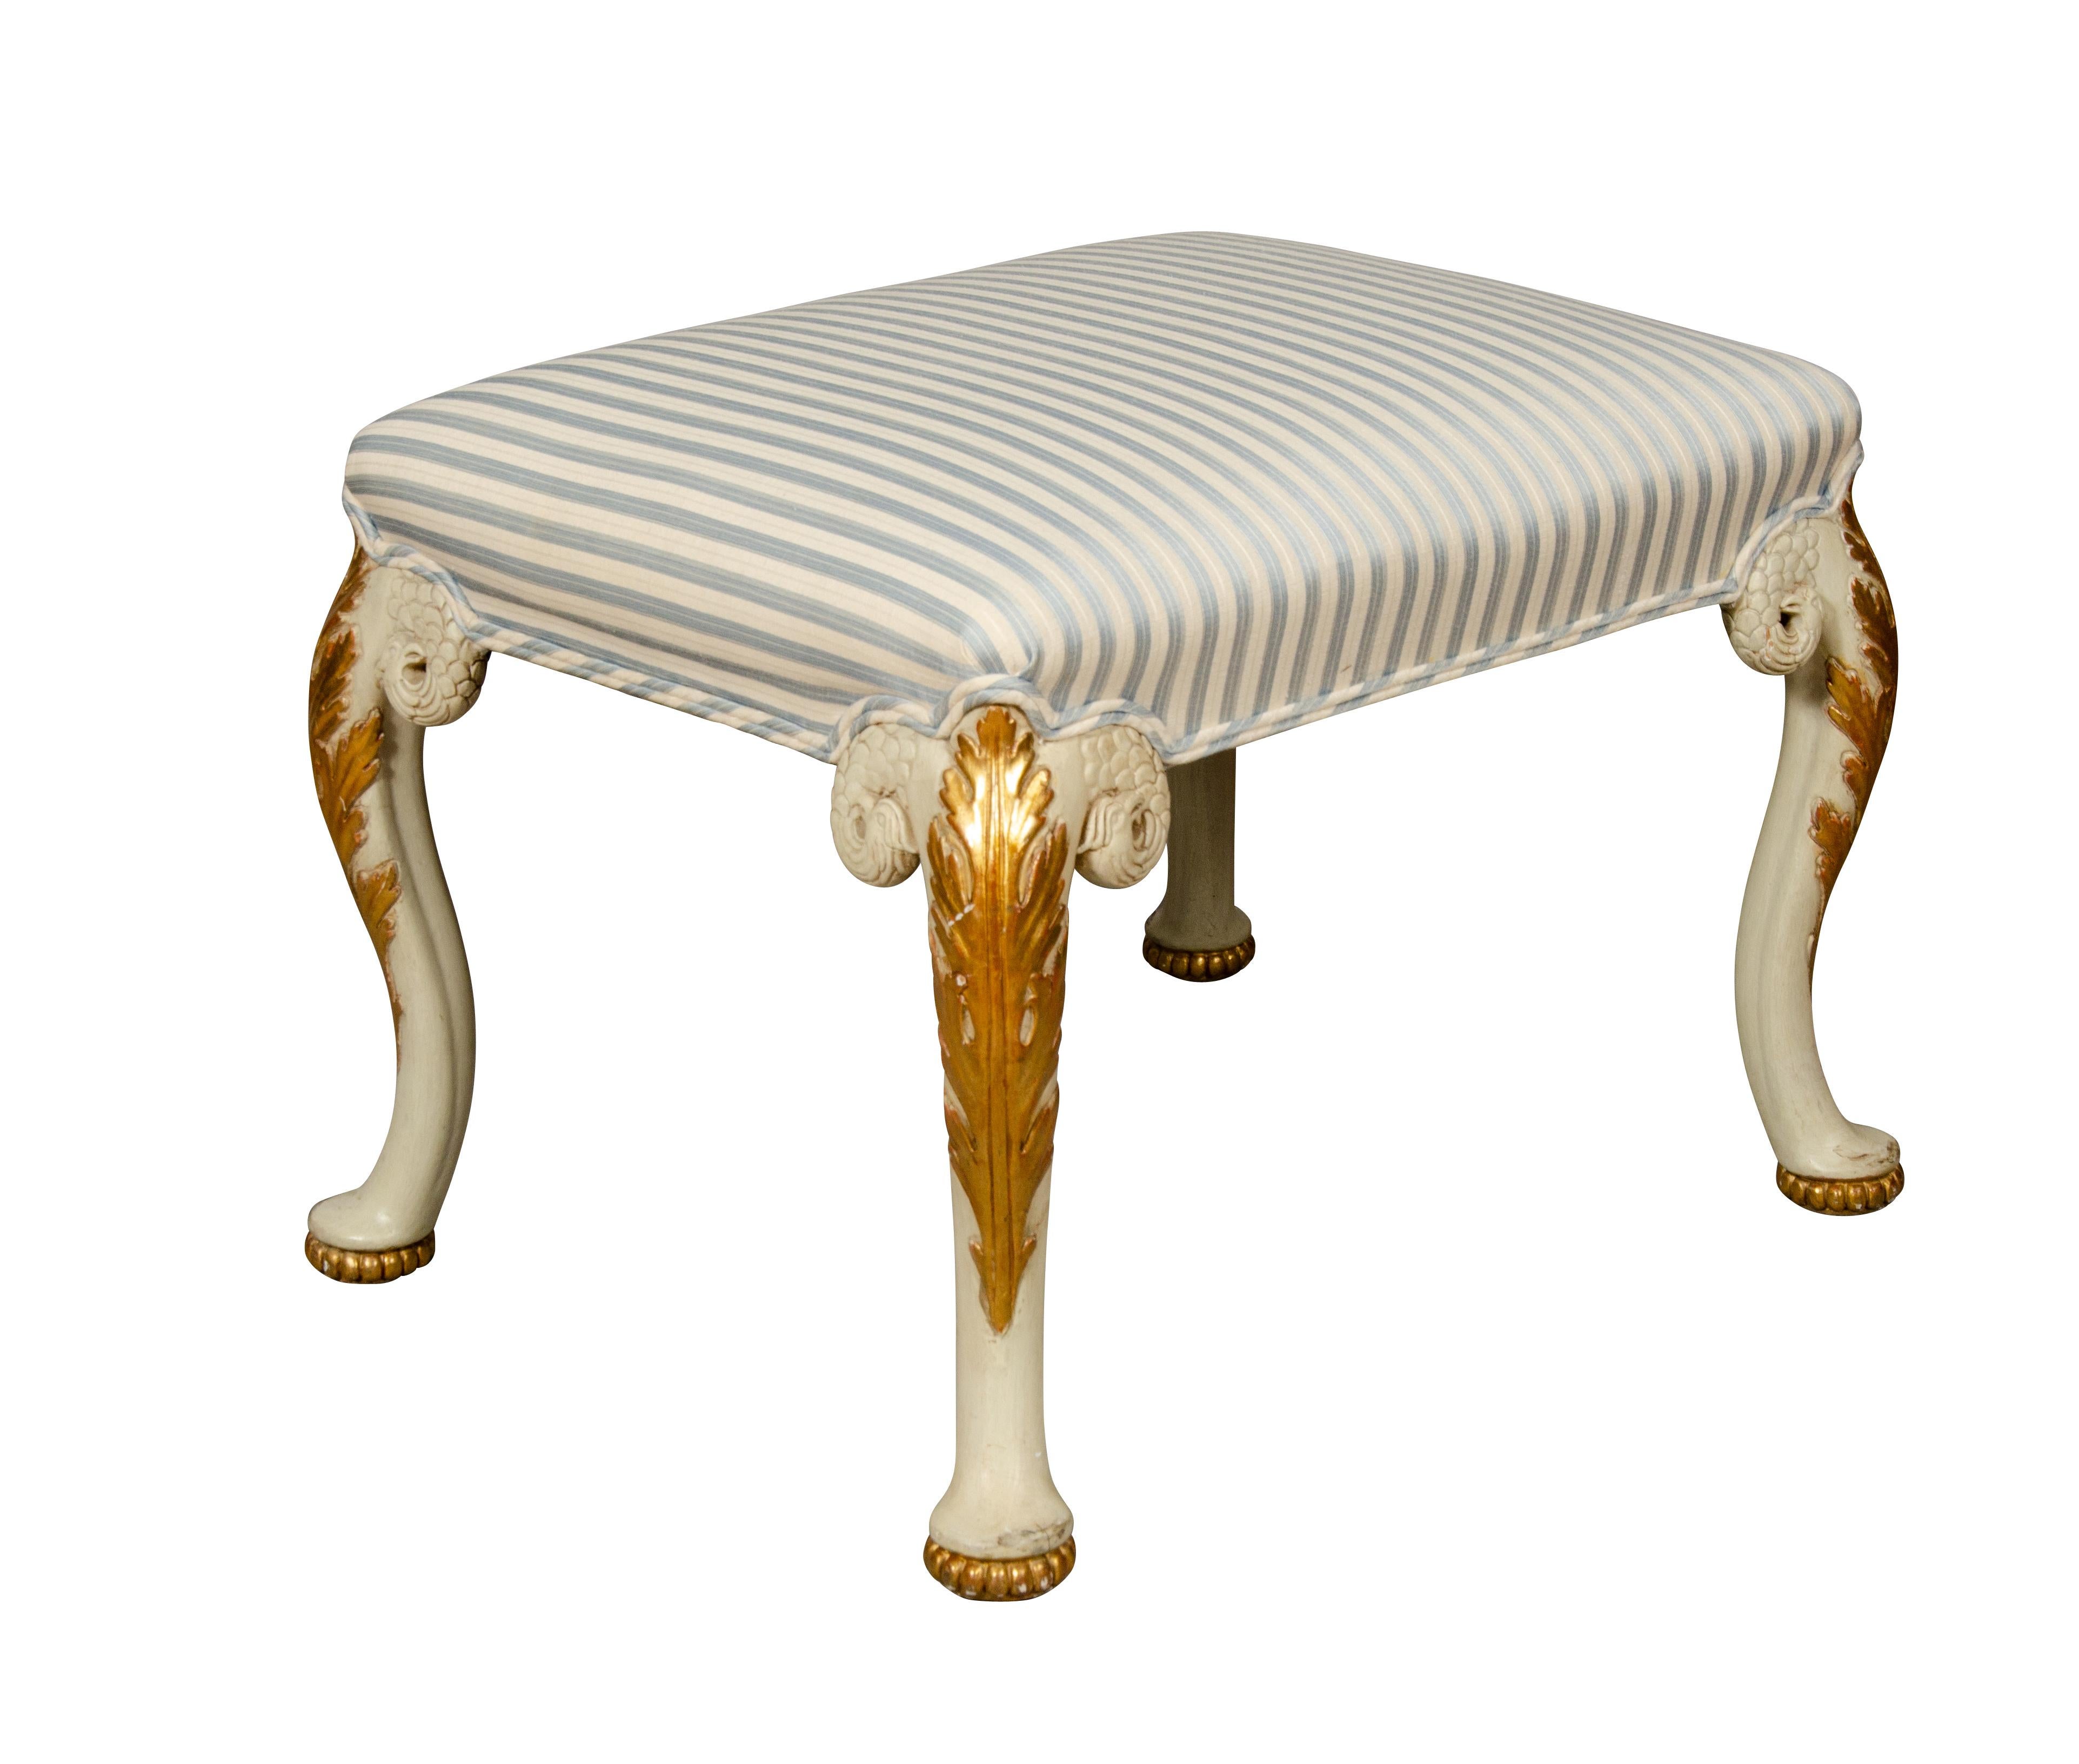 Early 18th Century George I Style Painted and Gilded Bench